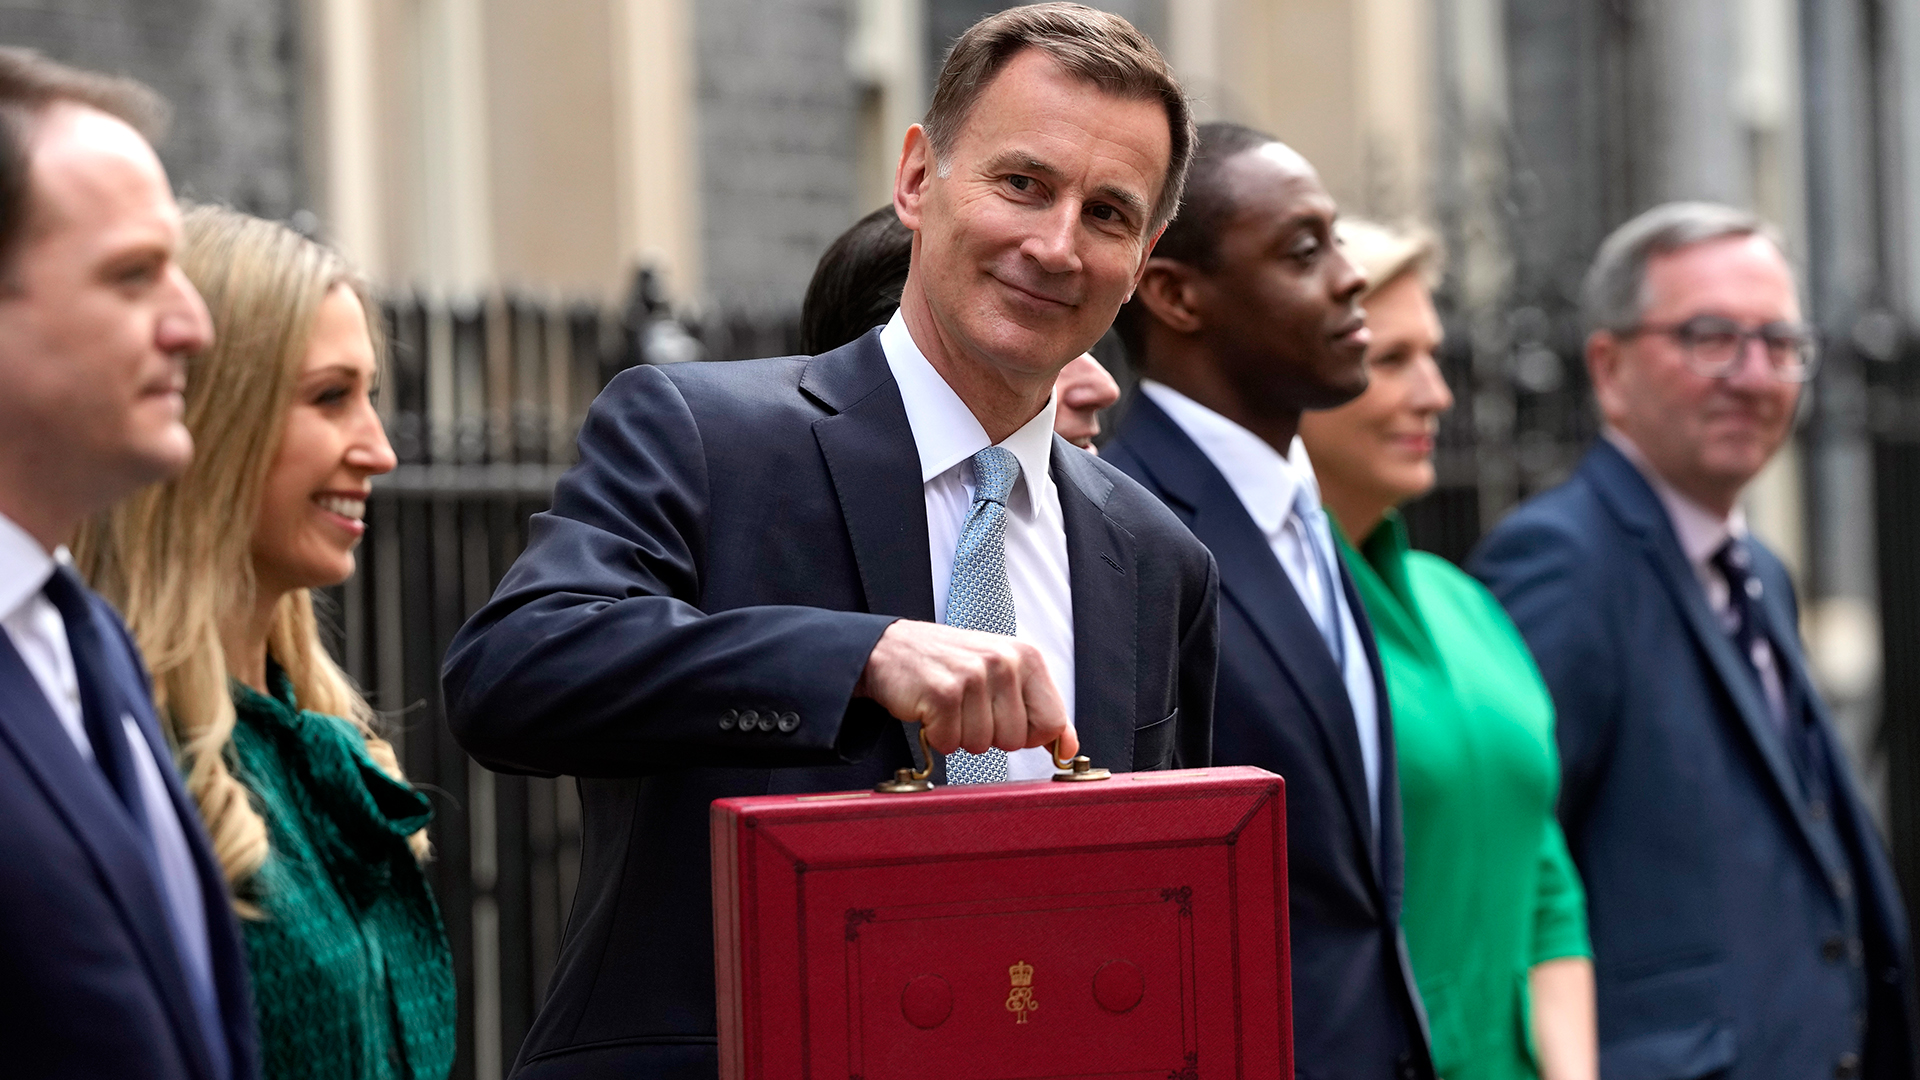 Can the Conservative government’s budget win over British voters? | Business and Economy